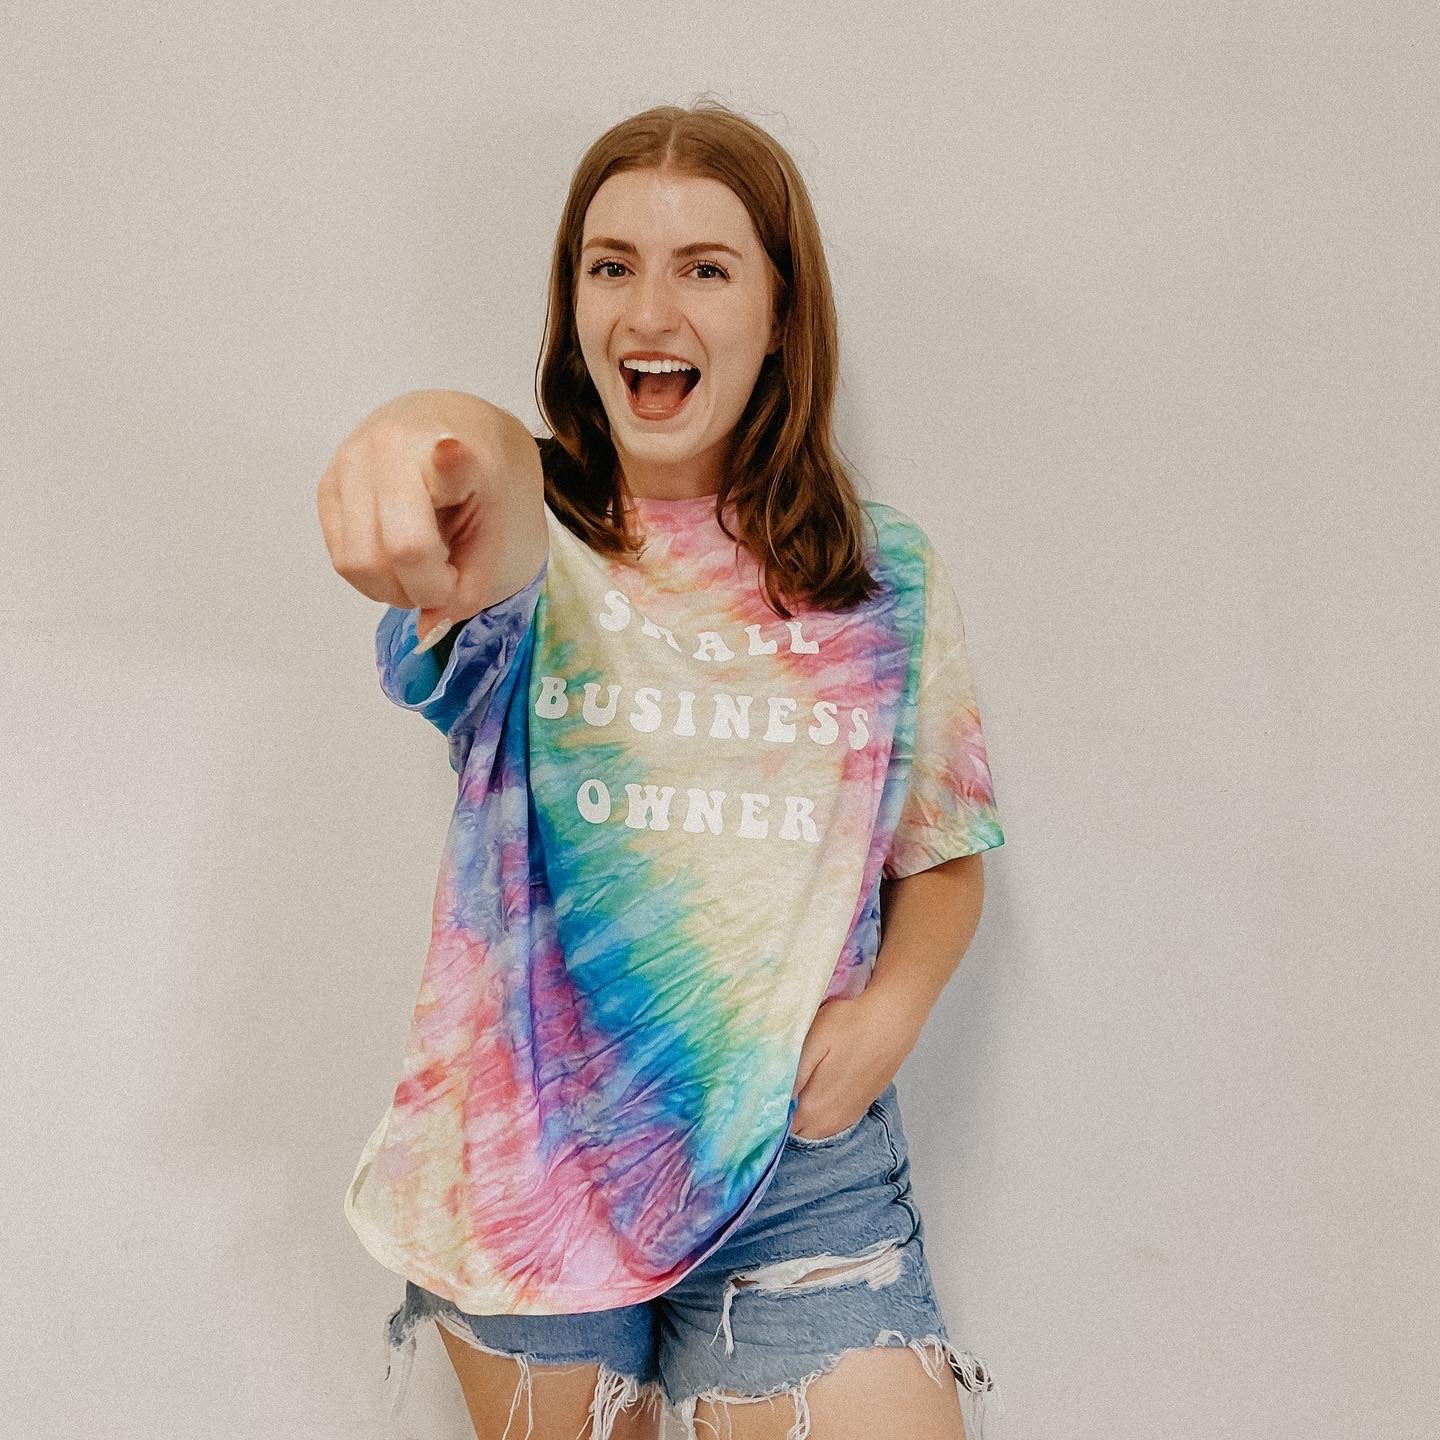 Tie Dye Small Business Owner Tee